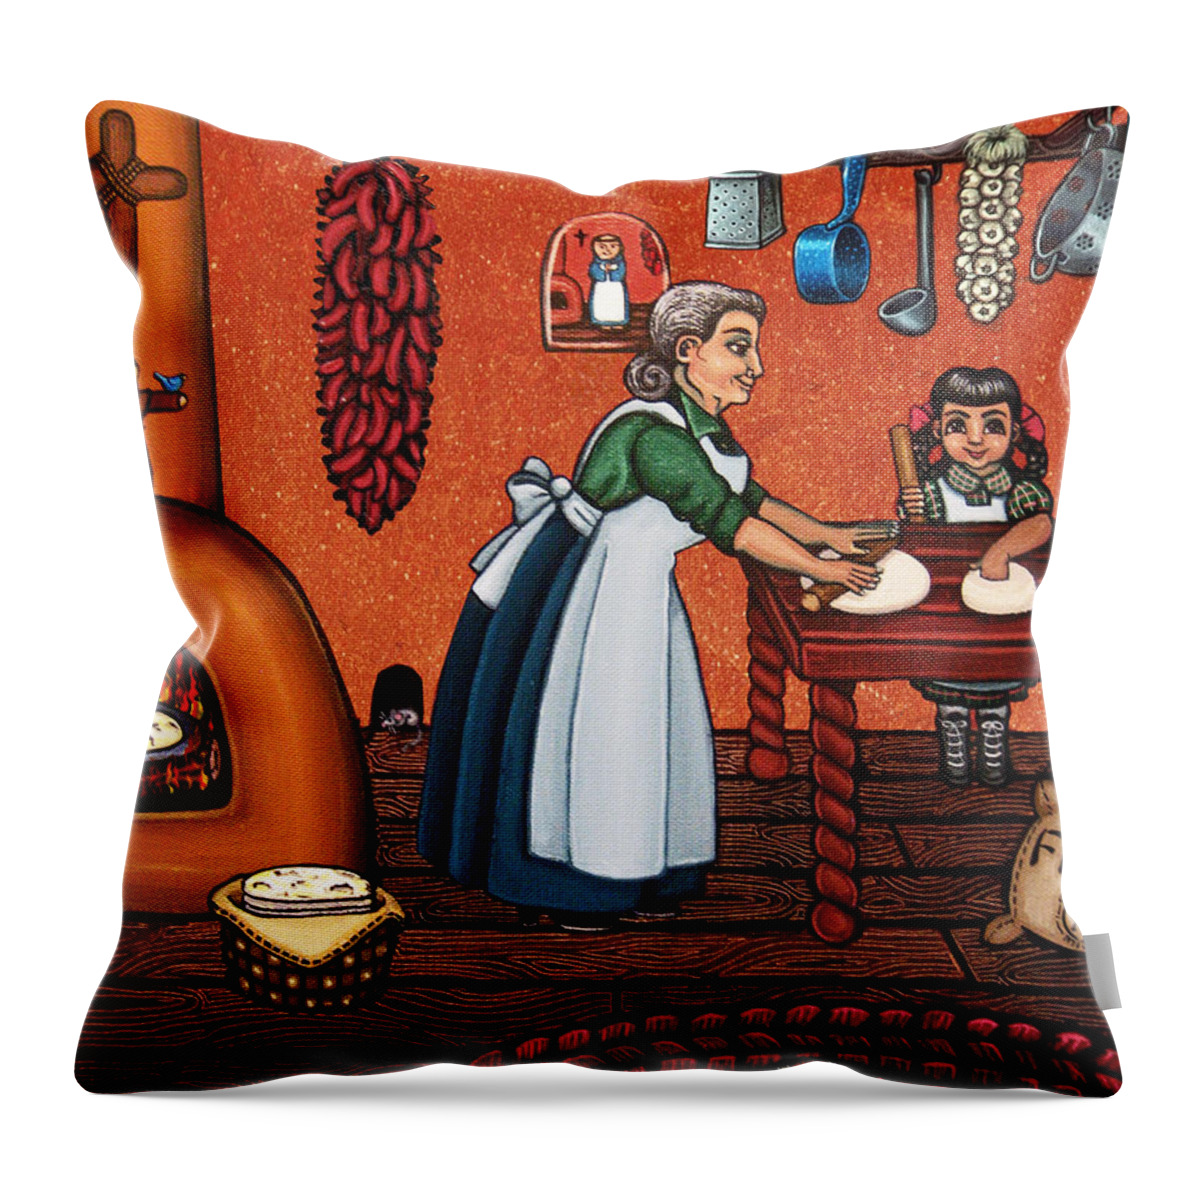 Cook Throw Pillow featuring the painting Making Tortillas by Victoria De Almeida